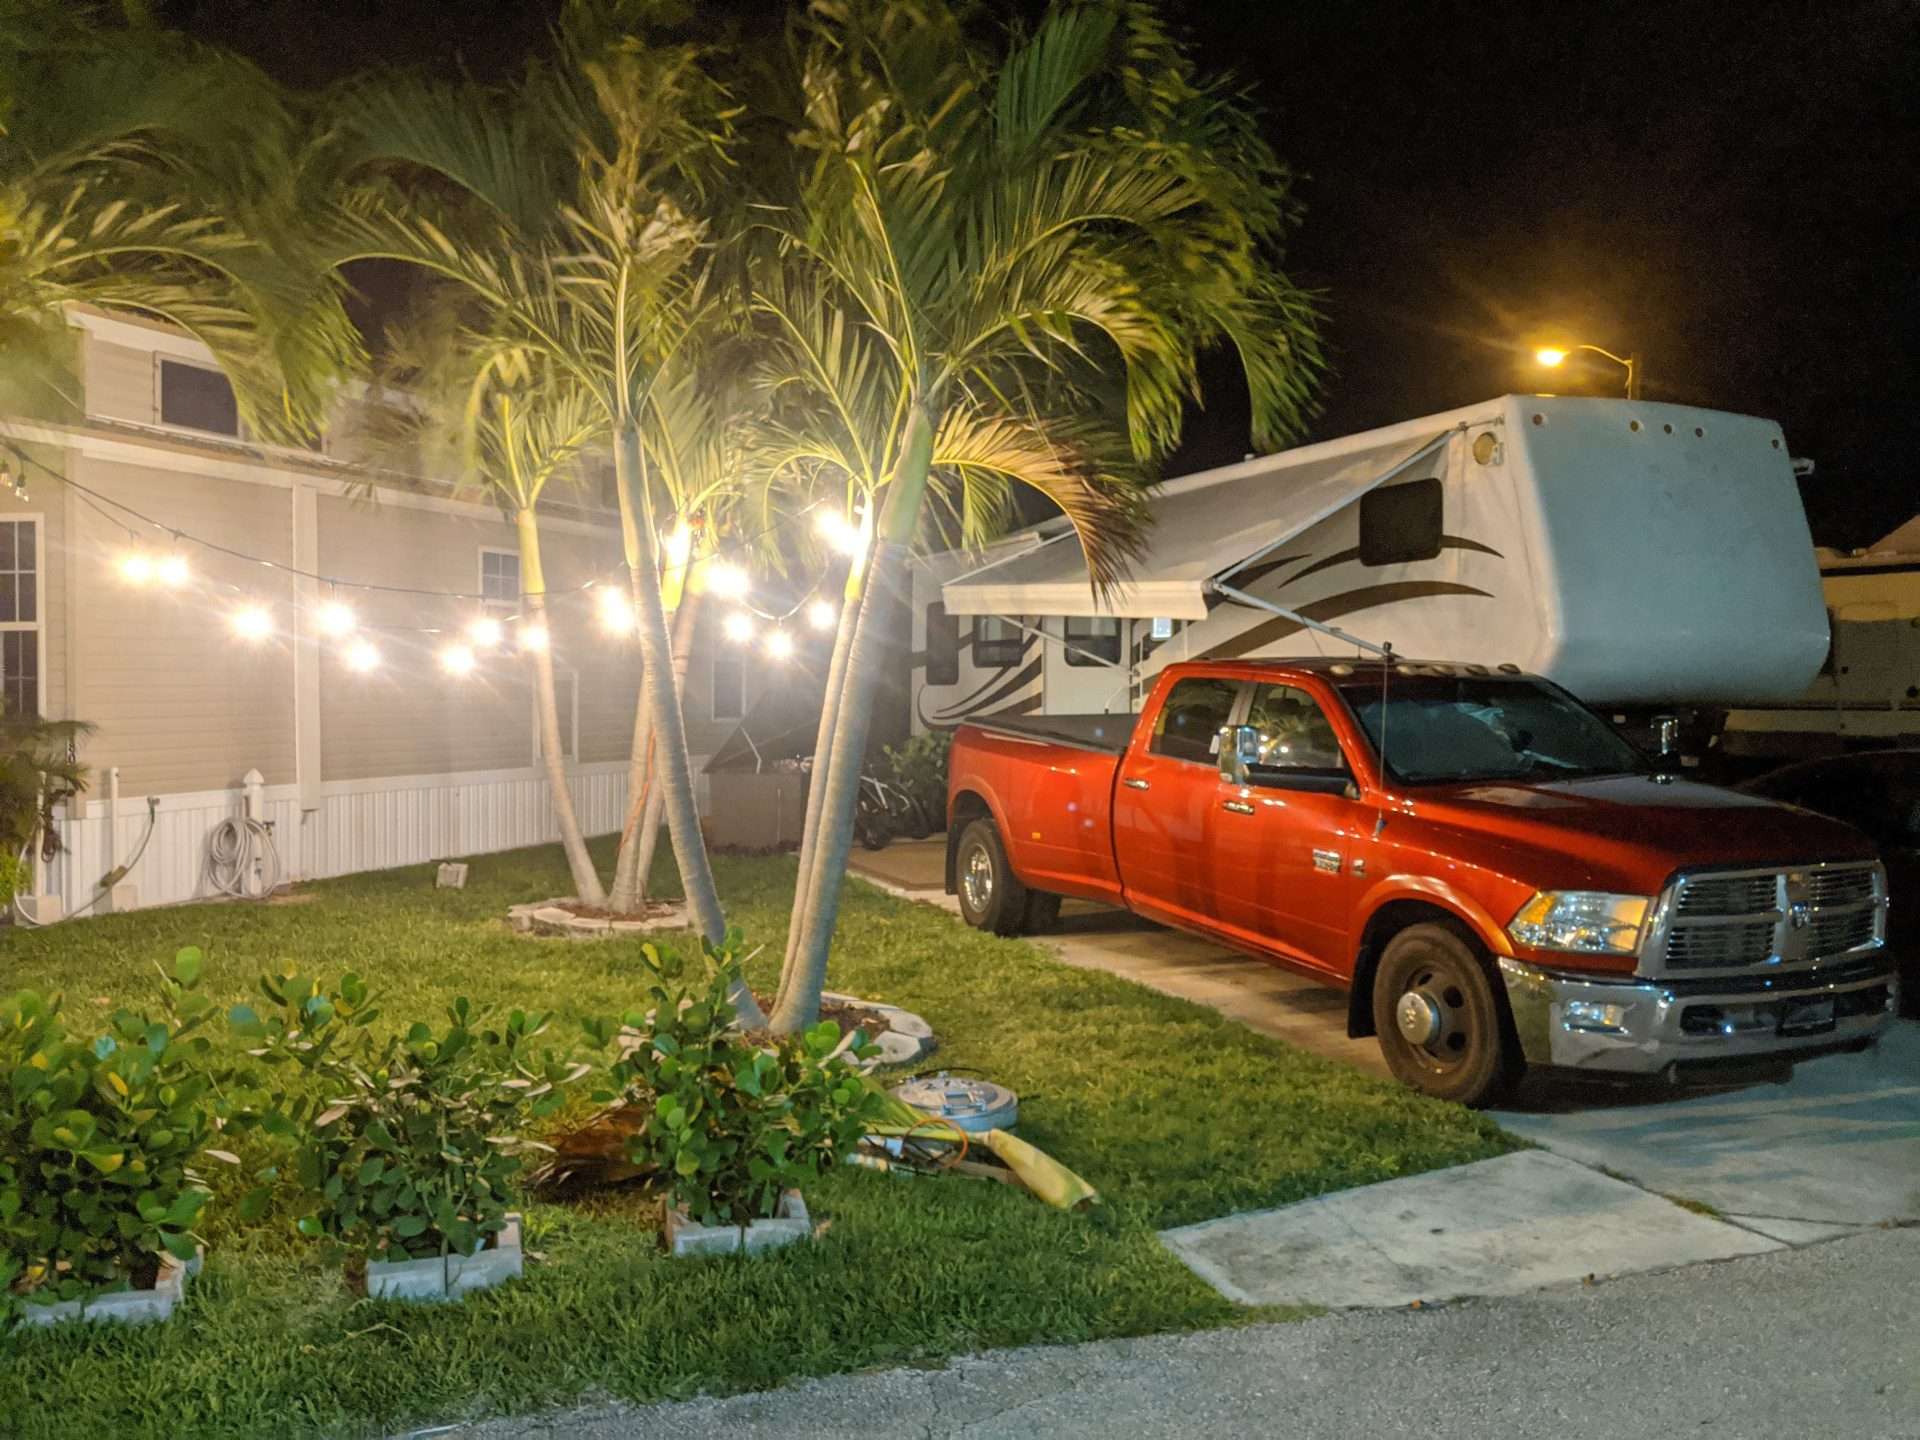 string lights hung on palm trees at RV lot